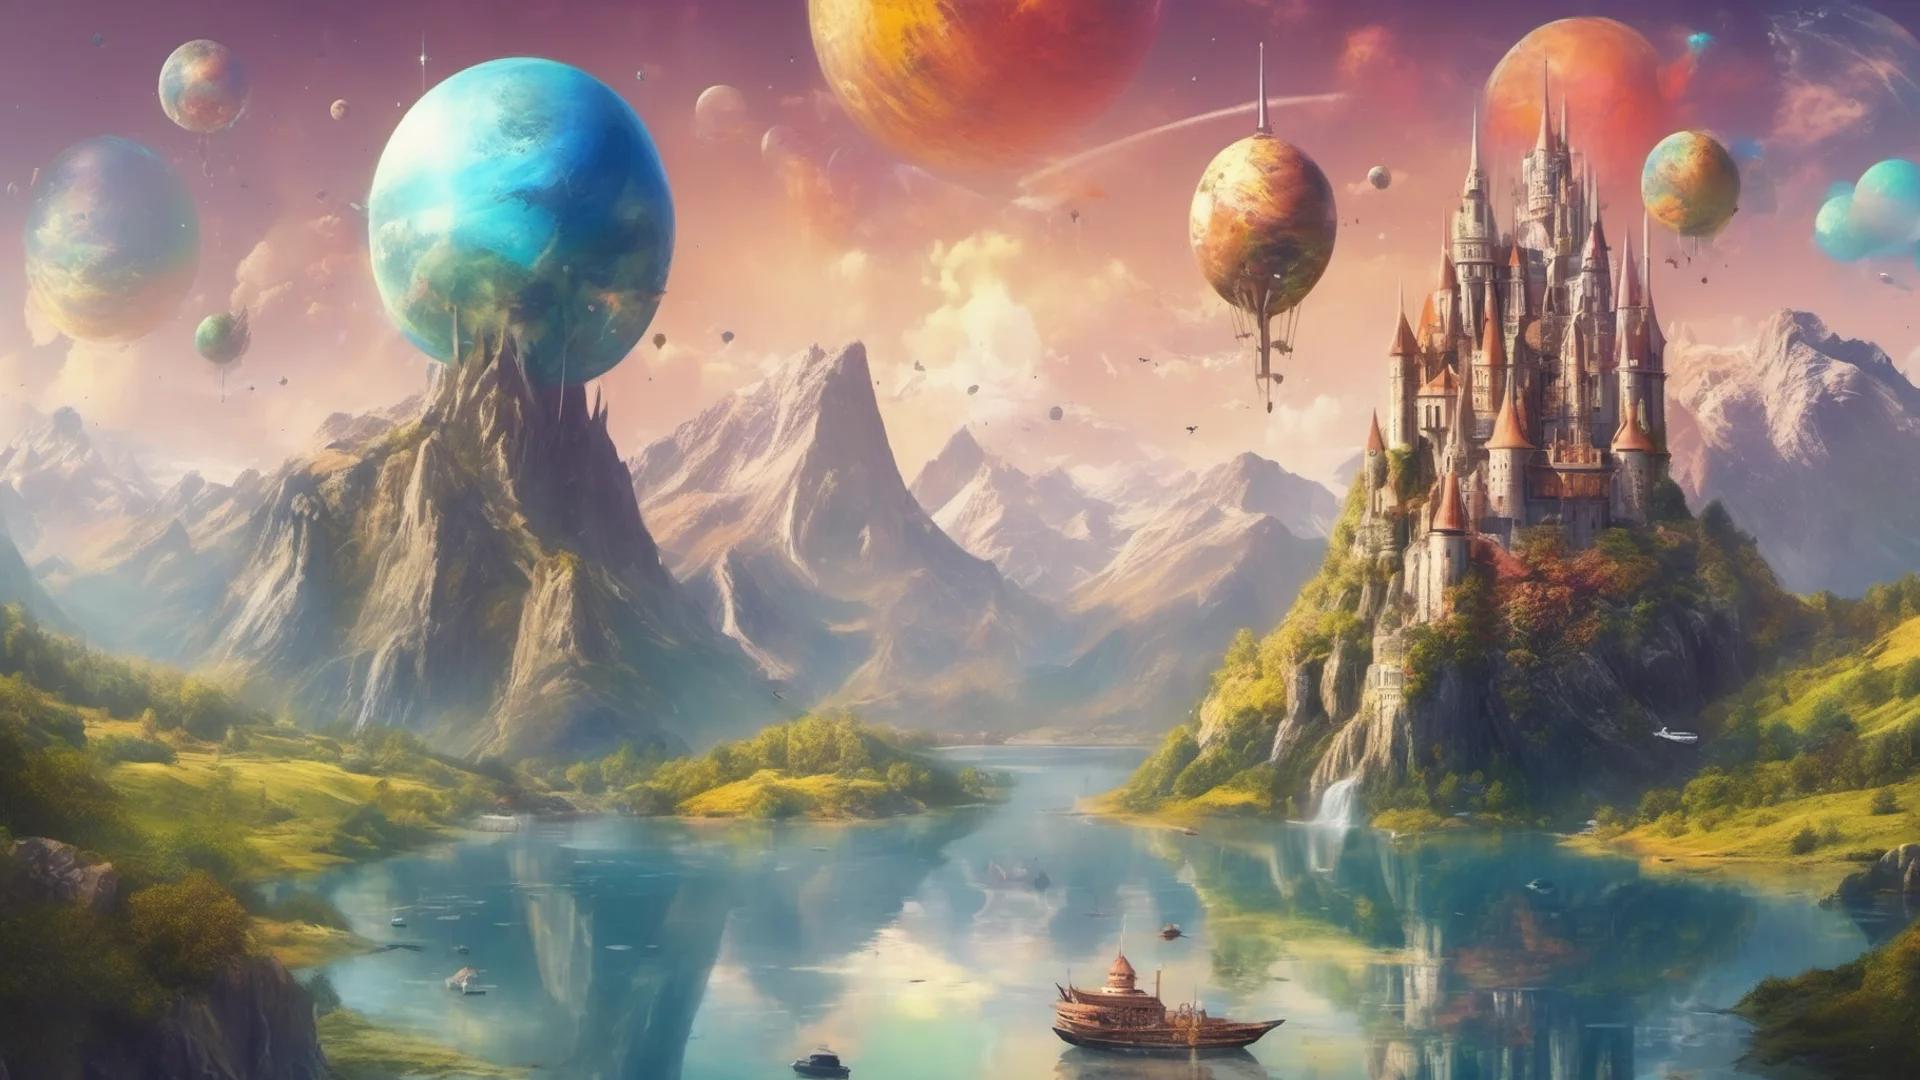 beautiful environment castle on mountains with lakes colorful planets above small flying airships amazing awesome portrait 2 wide